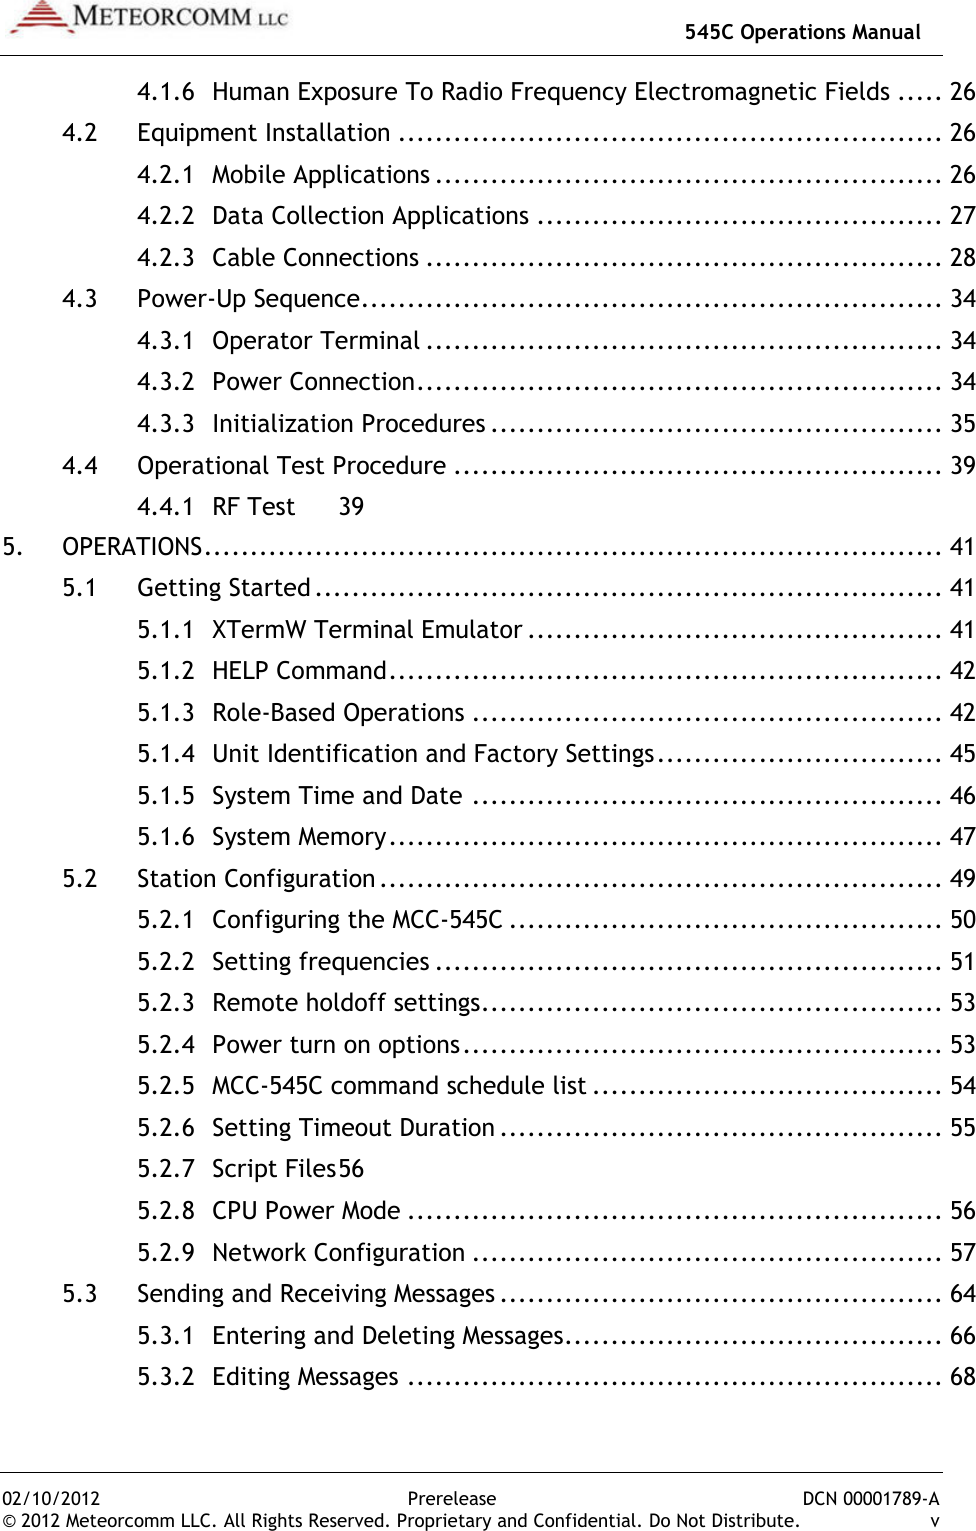   545C Operations Manual 02/10/2012  Prerelease  DCN 00001789-A © 2012 Meteorcomm LLC. All Rights Reserved. Proprietary and Confidential. Do Not Distribute.  v 4.1.6 Human Exposure To Radio Frequency Electromagnetic Fields ..... 26 4.2 Equipment Installation ........................................................... 26 4.2.1 Mobile Applications ....................................................... 26 4.2.2 Data Collection Applications ............................................ 27 4.2.3 Cable Connections ........................................................ 28 4.3 Power-Up Sequence ............................................................... 34 4.3.1 Operator Terminal ........................................................ 34 4.3.2 Power Connection ......................................................... 34 4.3.3 Initialization Procedures ................................................. 35 4.4 Operational Test Procedure ..................................................... 39 4.4.1 RF Test  39 5. OPERATIONS ................................................................................ 41 5.1 Getting Started .................................................................... 41 5.1.1 XTermW Terminal Emulator ............................................. 41 5.1.2 HELP Command ............................................................ 42 5.1.3 Role-Based Operations ................................................... 42 5.1.4 Unit Identification and Factory Settings ............................... 45 5.1.5 System Time and Date ................................................... 46 5.1.6 System Memory ............................................................ 47 5.2 Station Configuration ............................................................. 49 5.2.1 Configuring the MCC-545C ............................................... 50 5.2.2 Setting frequencies ....................................................... 51 5.2.3 Remote holdoff settings .................................................. 53 5.2.4 Power turn on options .................................................... 53 5.2.5 MCC-545C command schedule list ...................................... 54 5.2.6 Setting Timeout Duration ................................................ 55 5.2.7 Script Files 56 5.2.8 CPU Power Mode .......................................................... 56 5.2.9 Network Configuration ................................................... 57 5.3 Sending and Receiving Messages ................................................ 64 5.3.1 Entering and Deleting Messages ......................................... 66 5.3.2 Editing Messages .......................................................... 68 